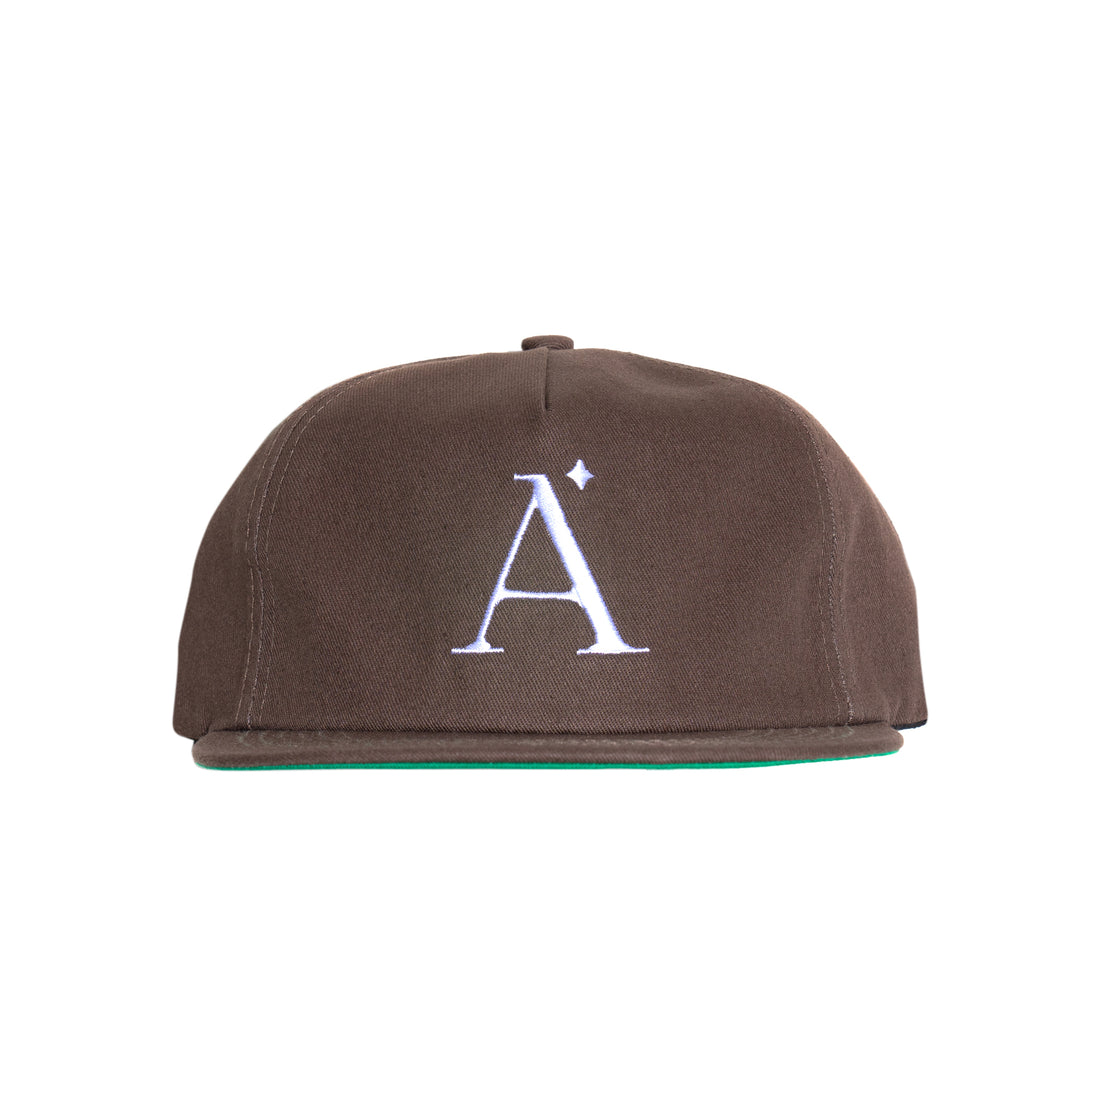 AUGUSTINE LOS ANGELES - EMBROIDERED UNSTRUCTURED 5 PANEL HAT  - CHOCOLATE